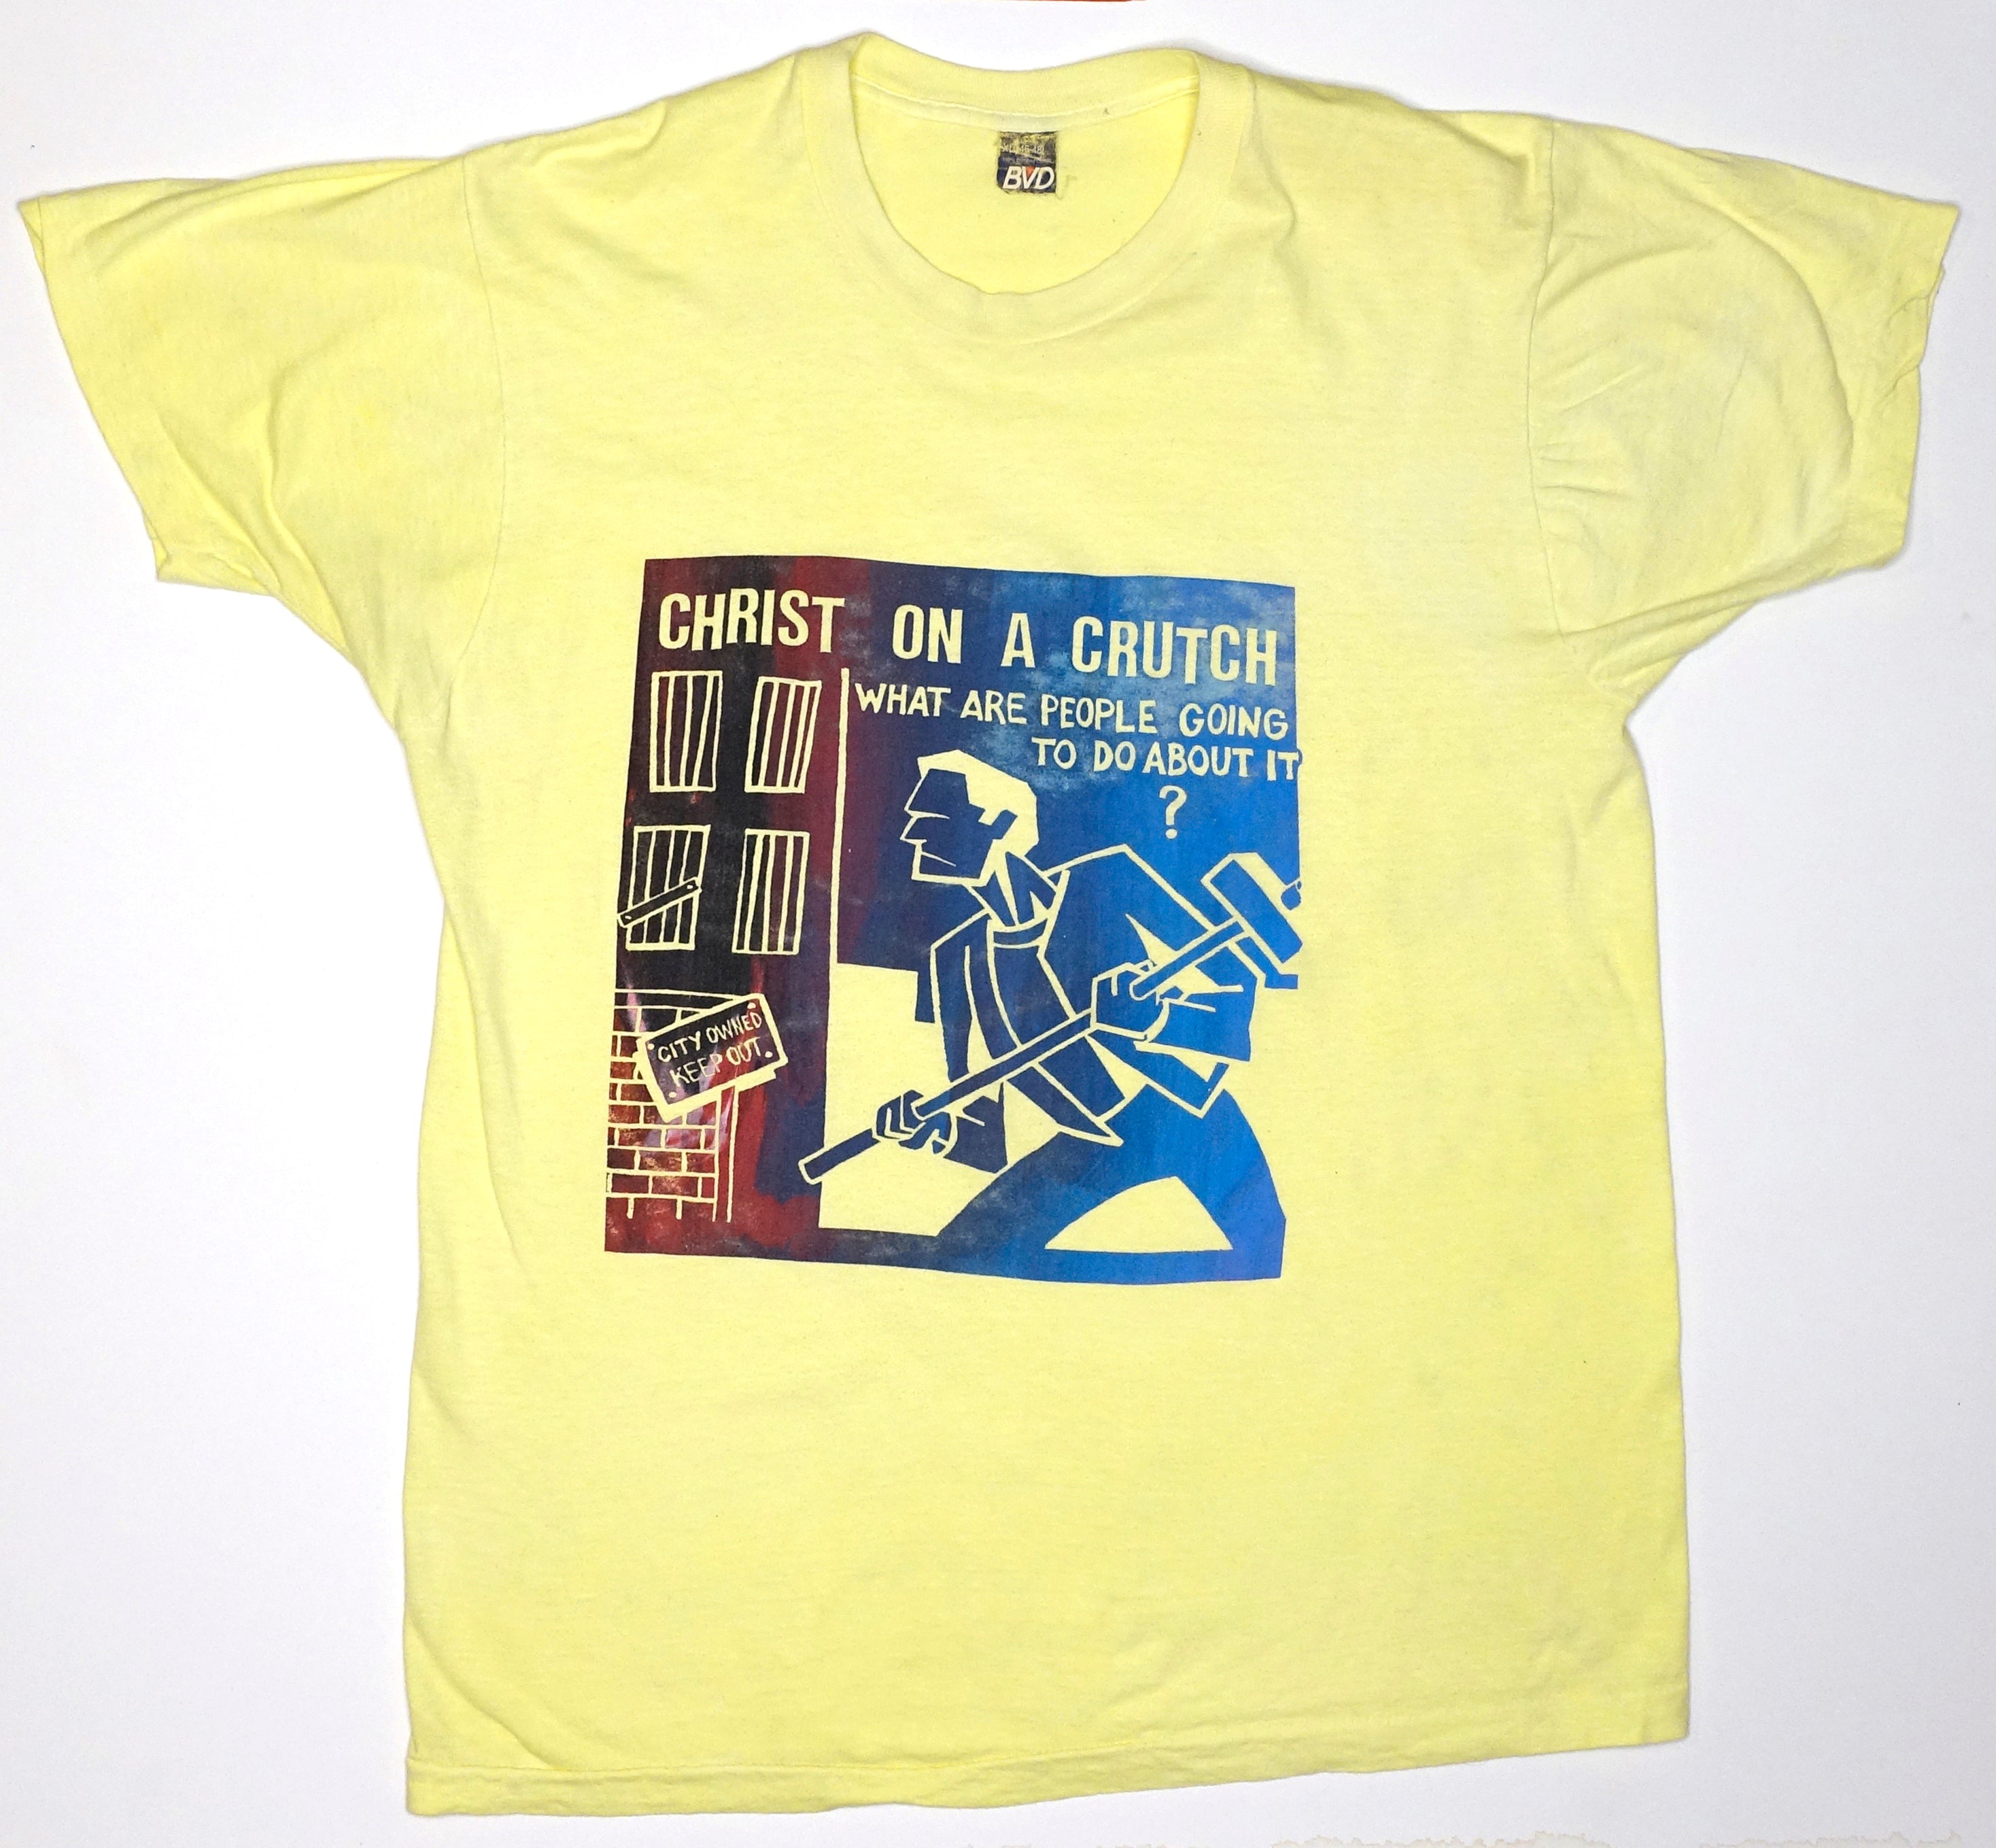 Christ On A Crutch - What Are People Going To Do About It? 80's Tour Shirt Size XL